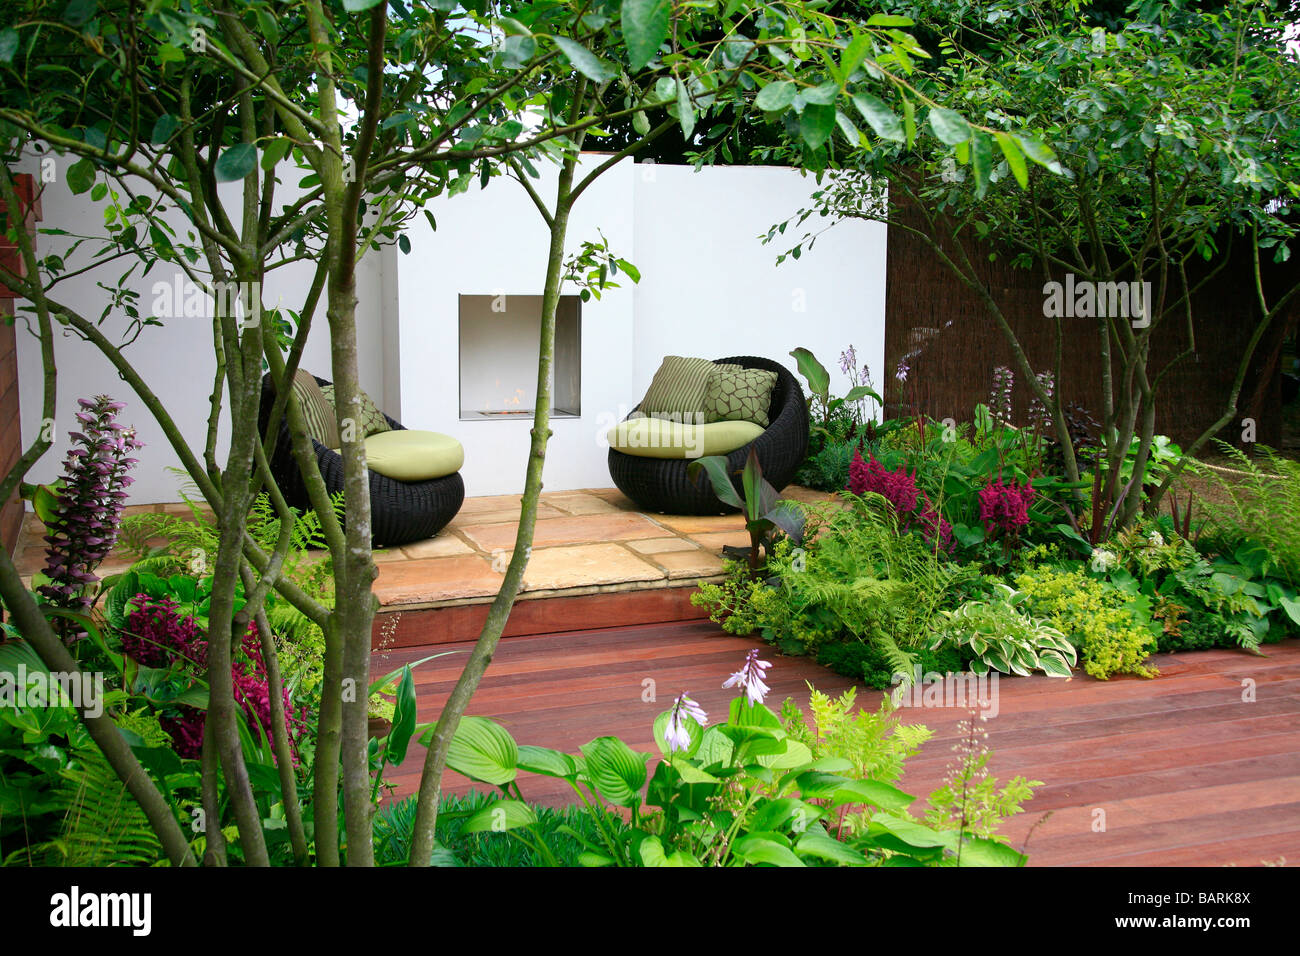 Small garden with hardwood decking and borders planted with shade loving ferns and perennials. Stock Photo